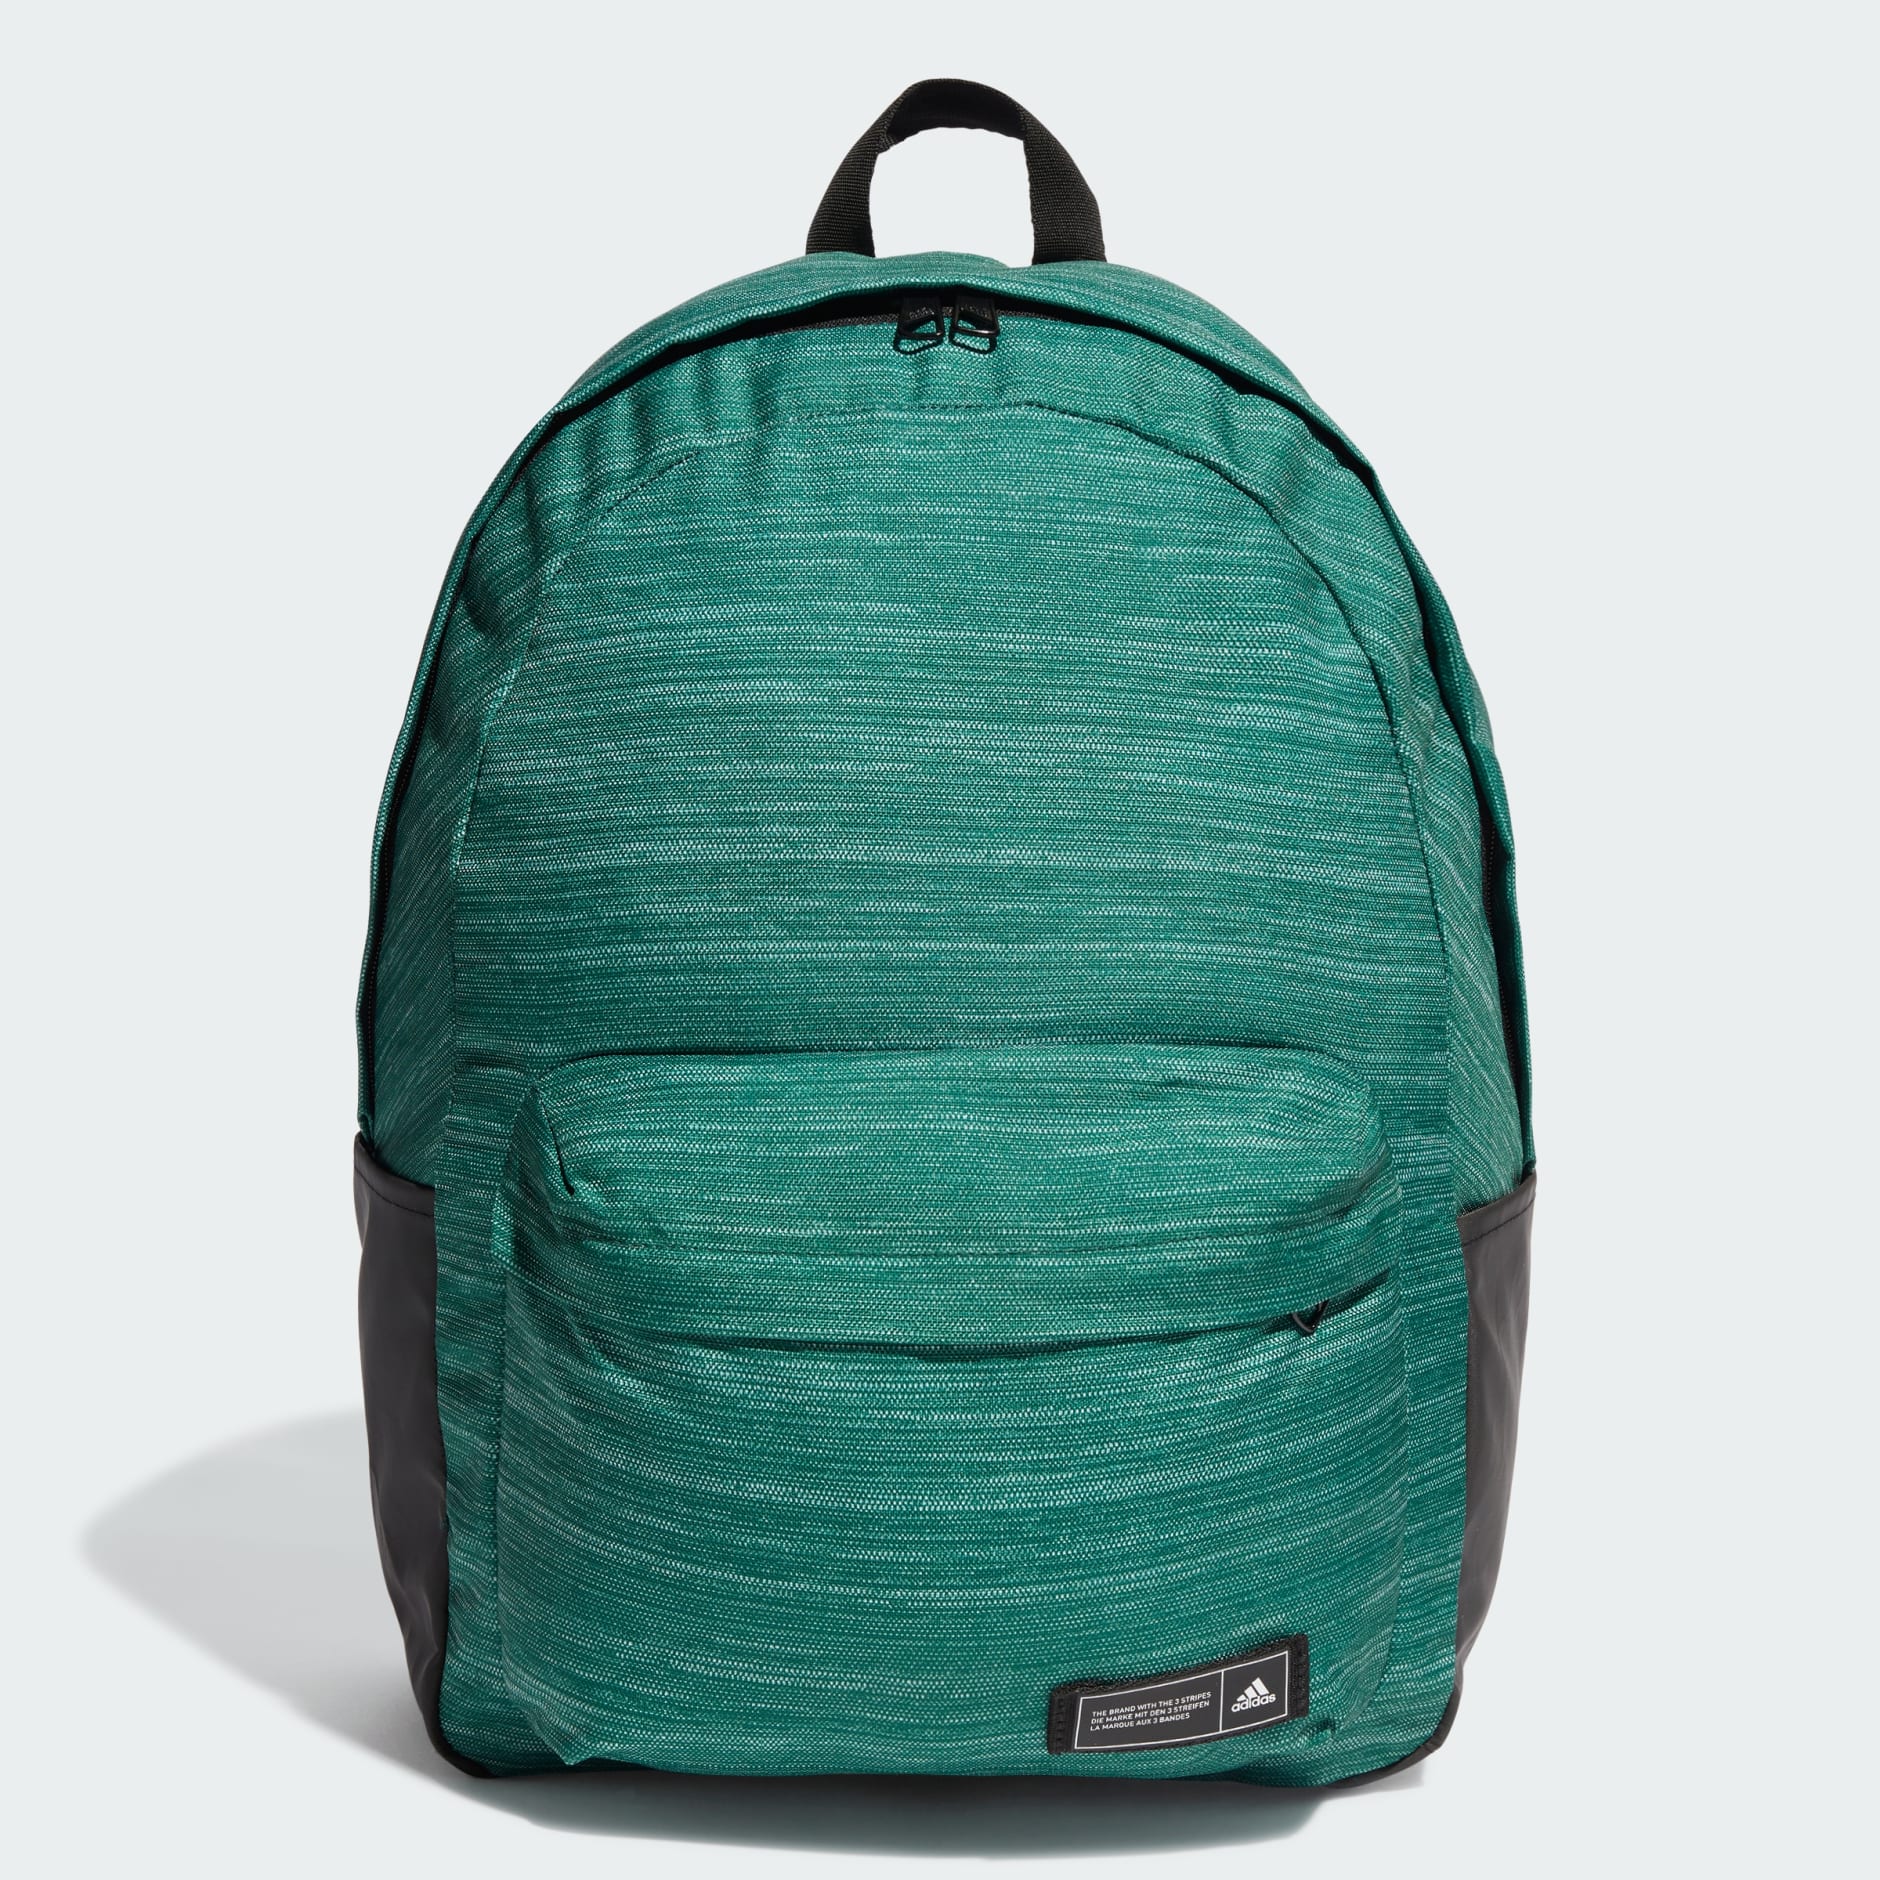 Accessories - Classic ATT1 Backpack - Green | adidas South Africa